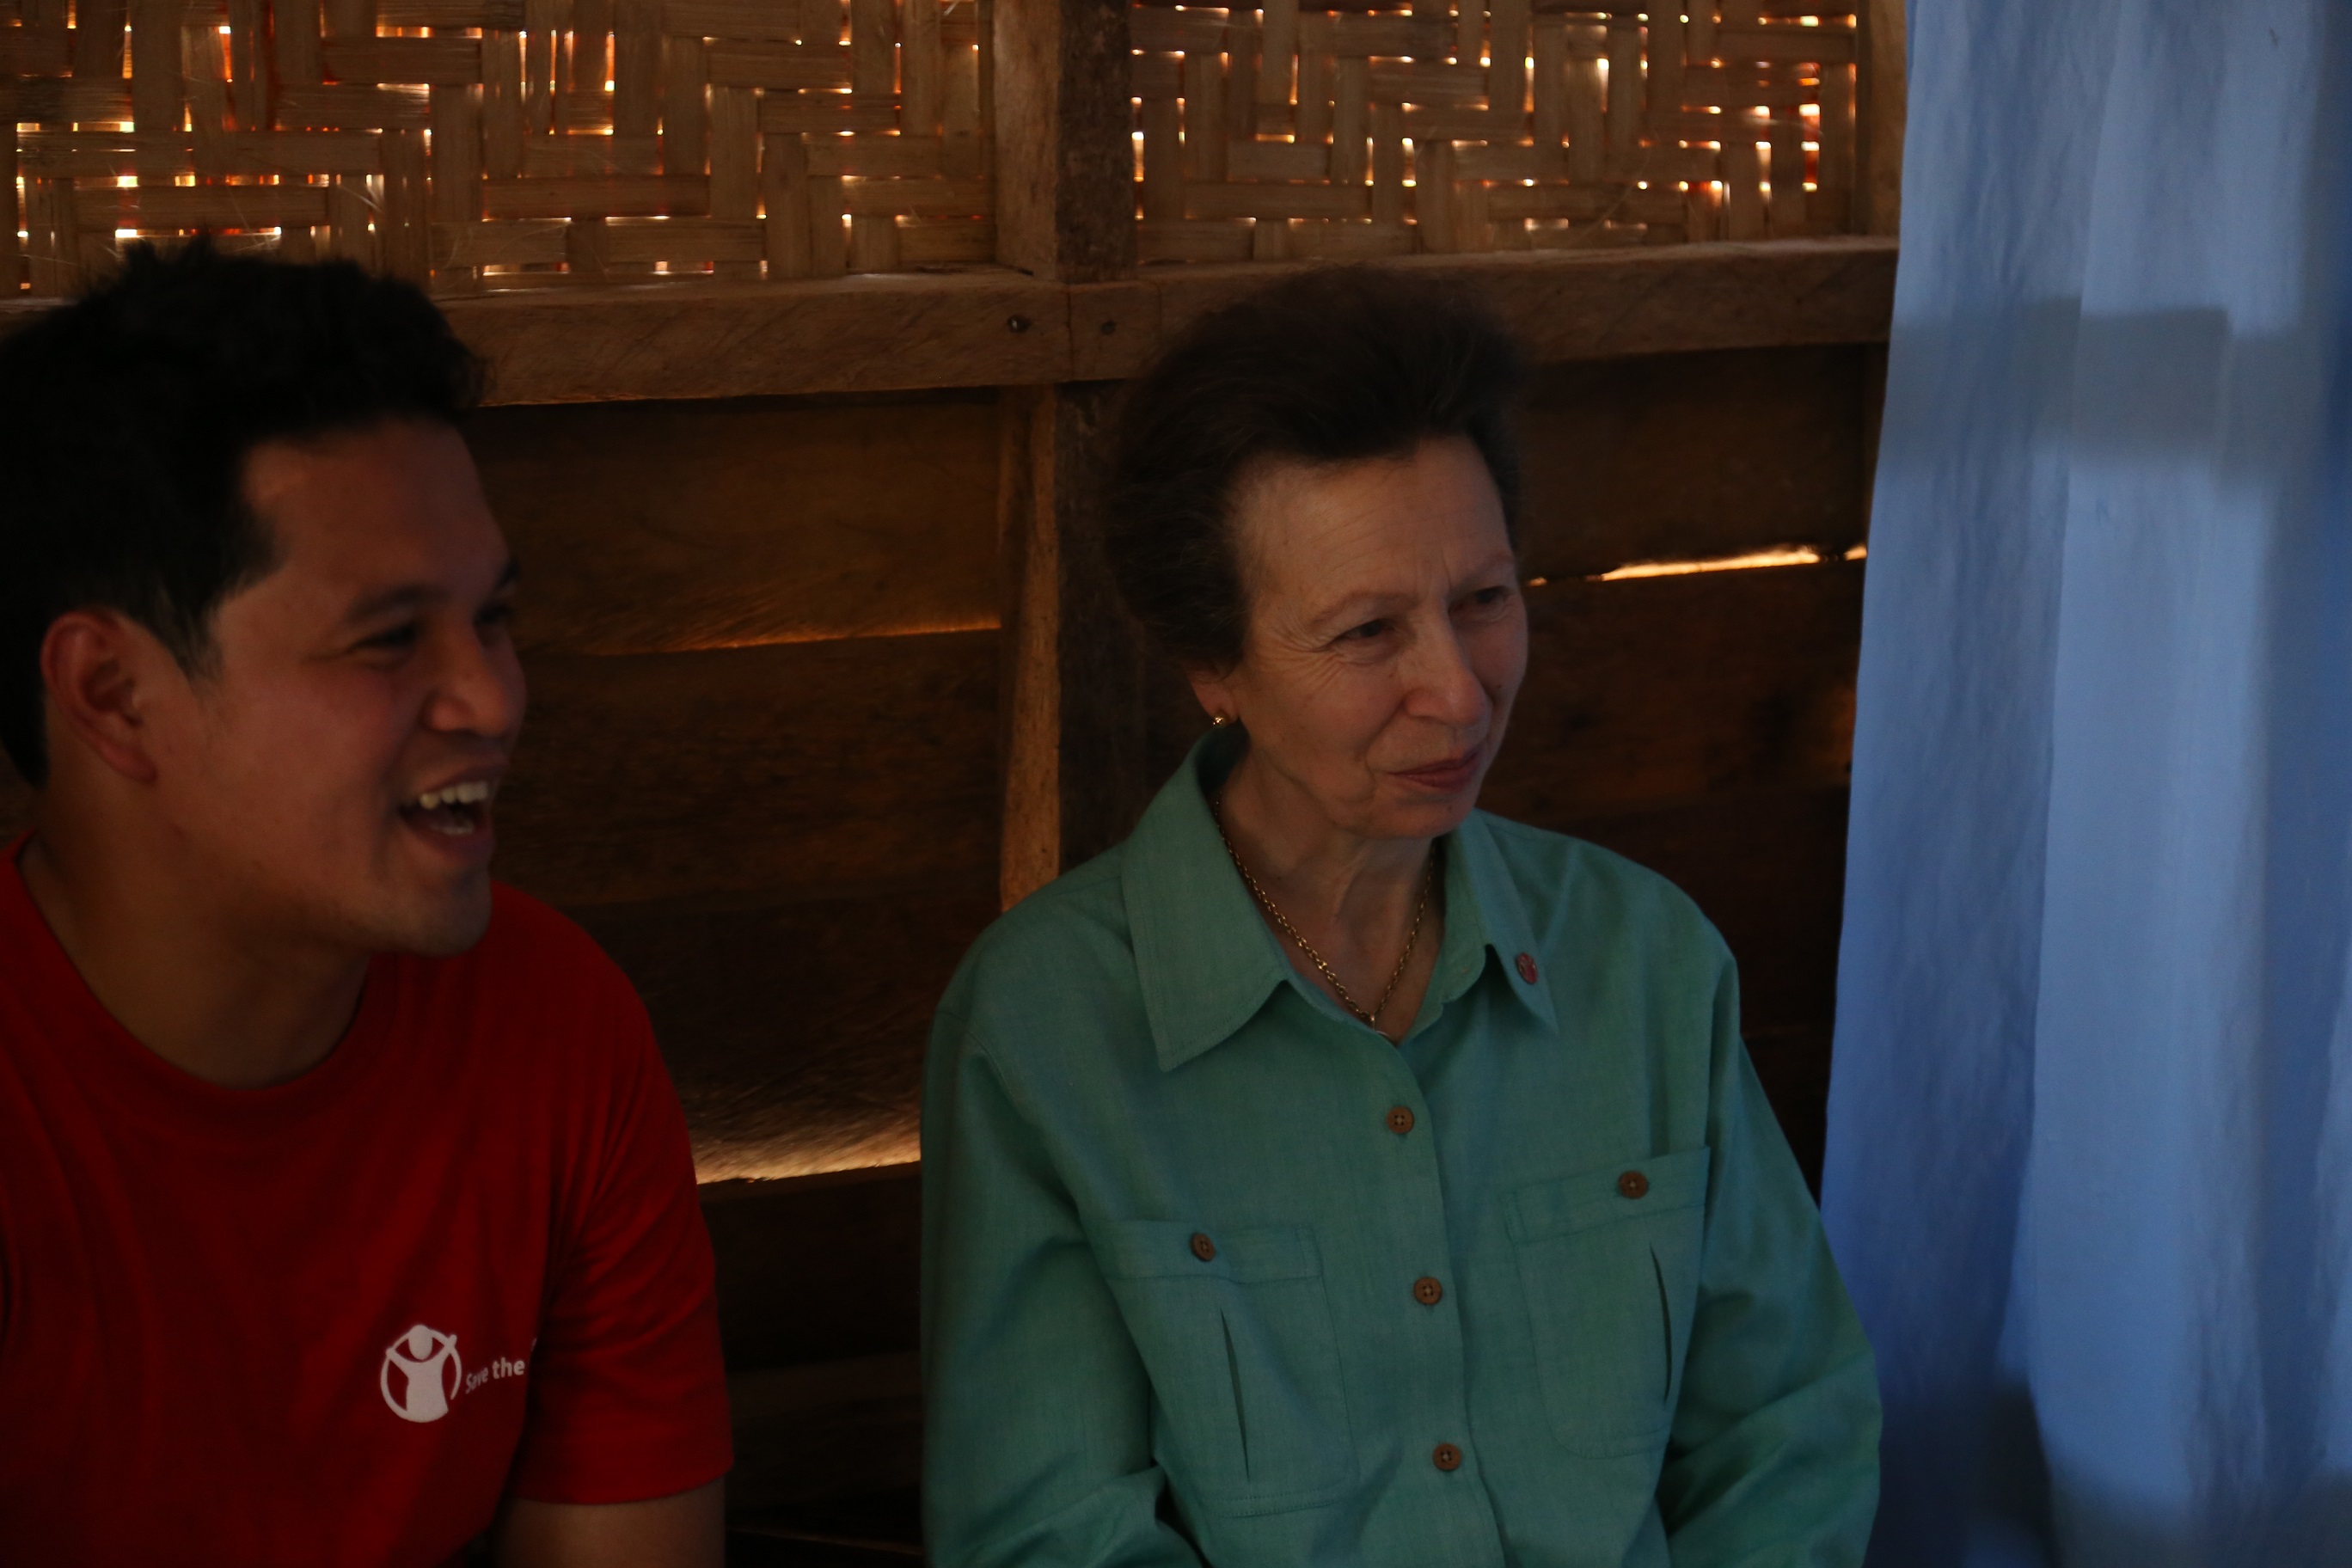 Her Royal Highness Princess Anne of UK Save the Children Philippines Leyte meet with locals